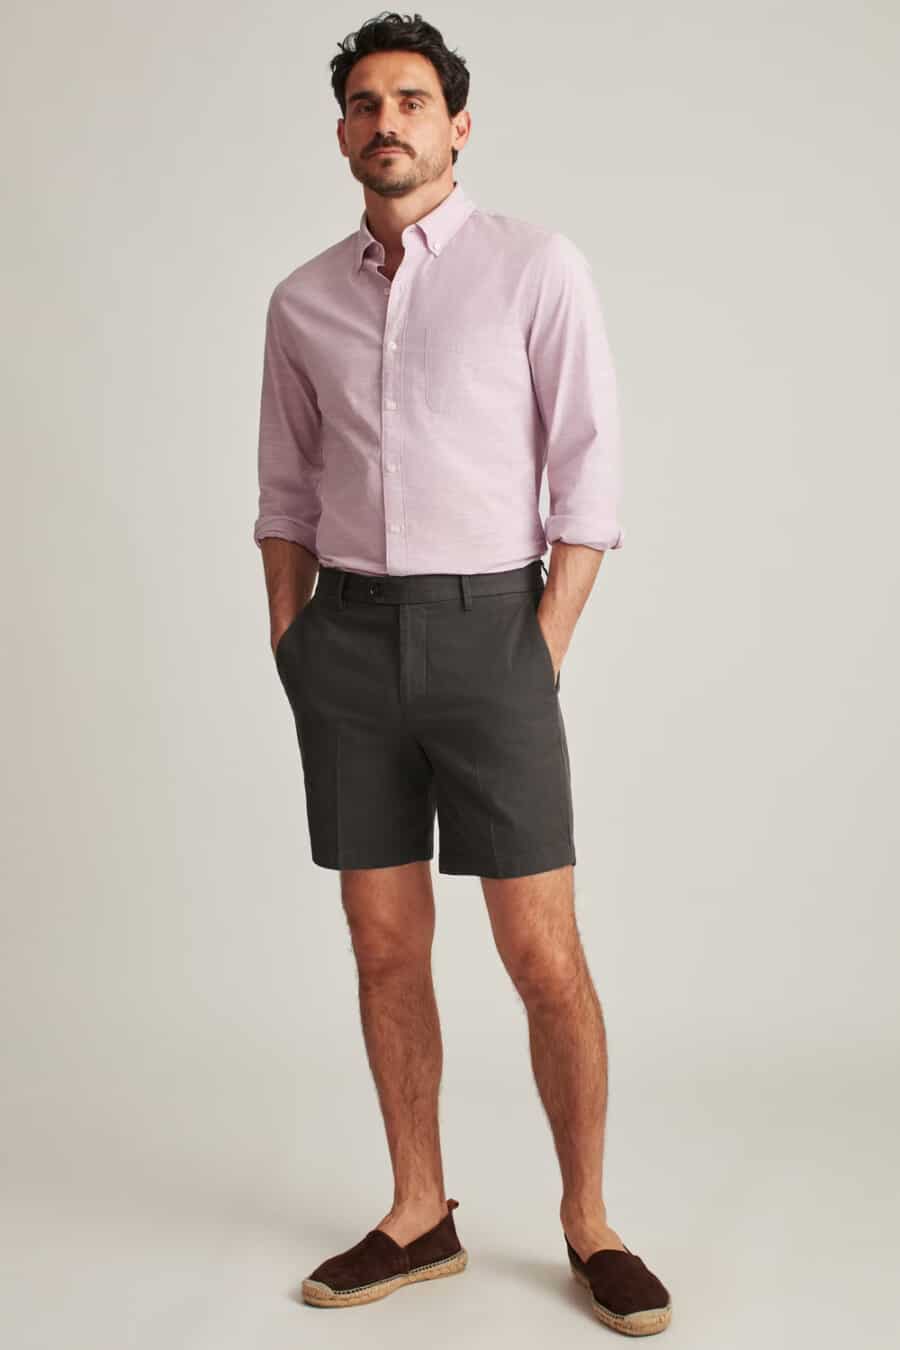 Men's pink button-down shirt tucked into charcoal grey tailored shorts with brown suede espadrilles outfit